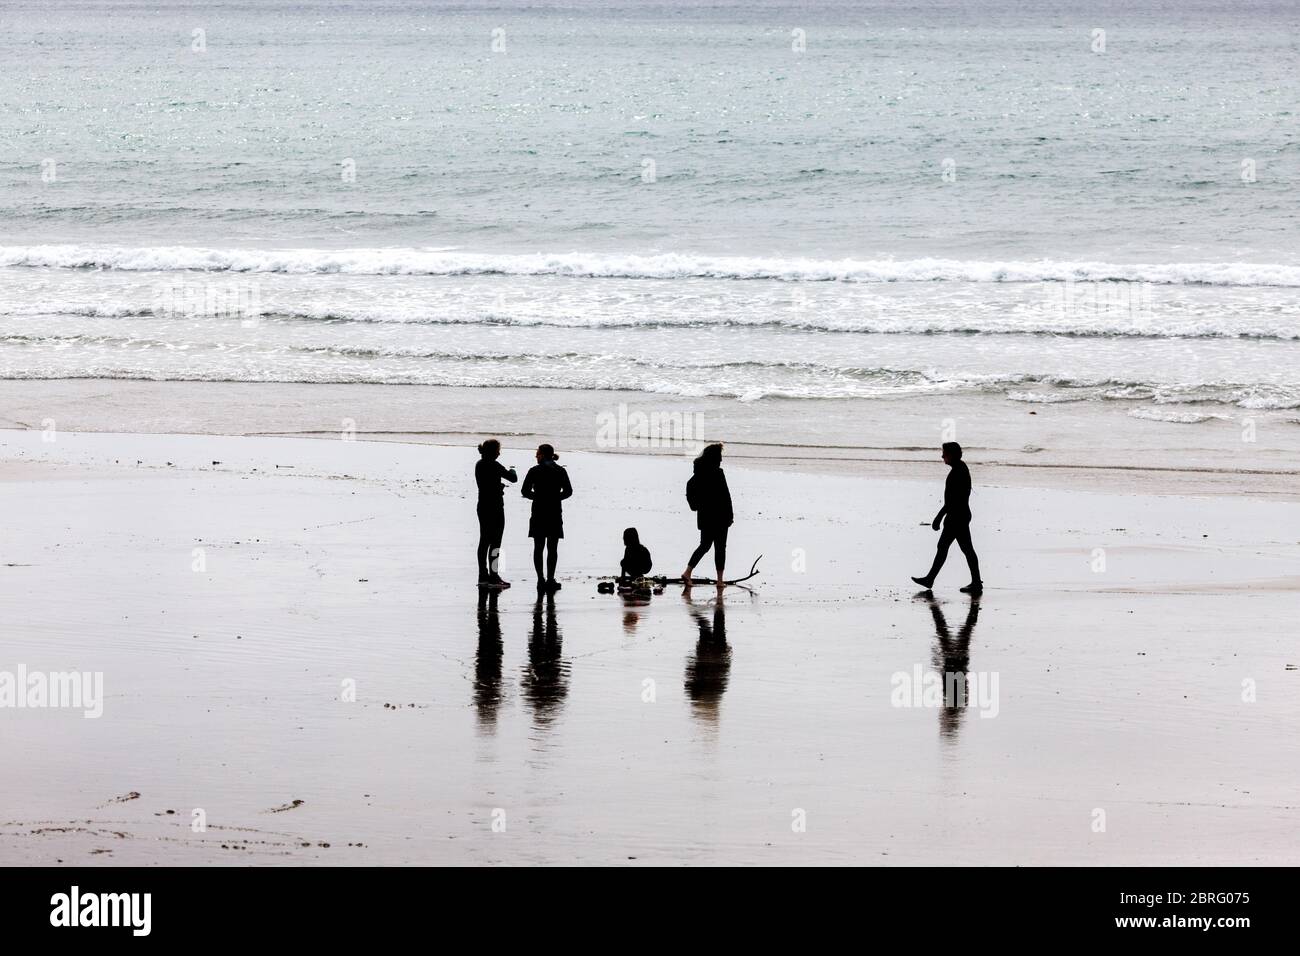 Garrettstown, Cork, Ireland. 21st May, 2020. A group taking advantage of the lifting of some Covid-19 restrictions to visit the beach at Garrettstown, Co. Cork, Ireland. - Credit; David Creedon / Alamy Live News Stock Photo